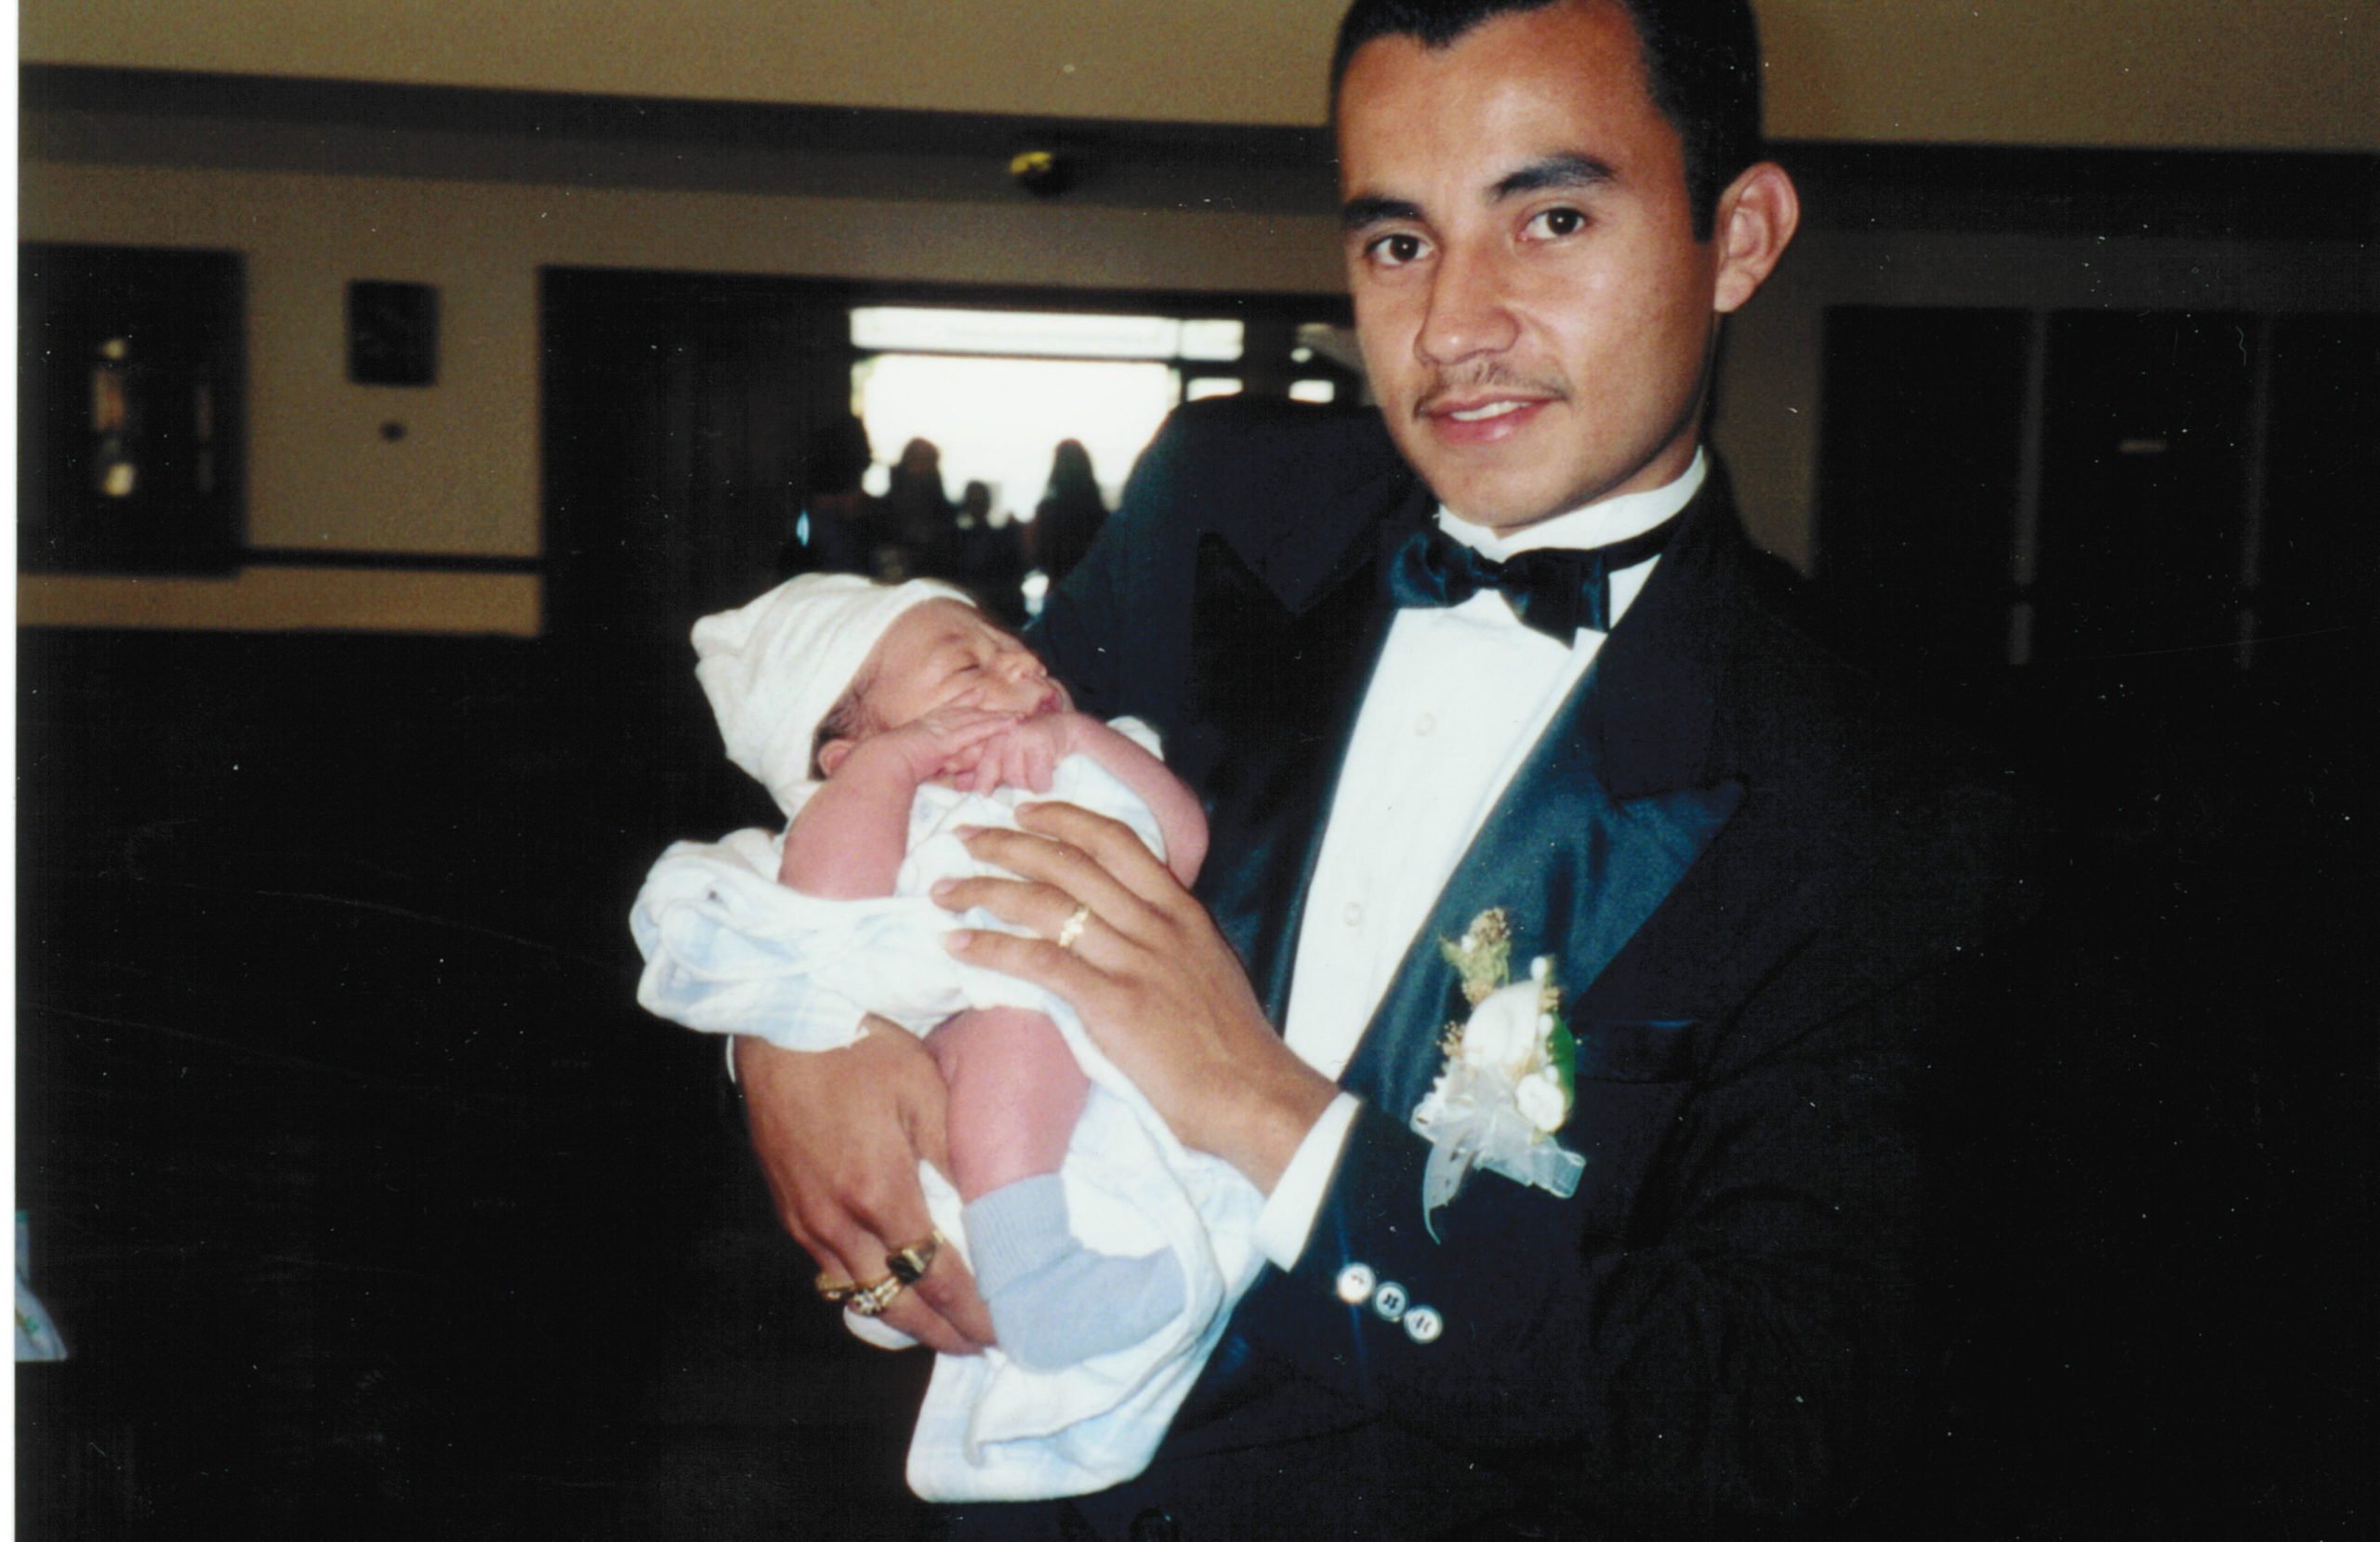 Areli Escobar, a Latinx man, poses with a baby while wearing a black tuxedo and bow-tie.